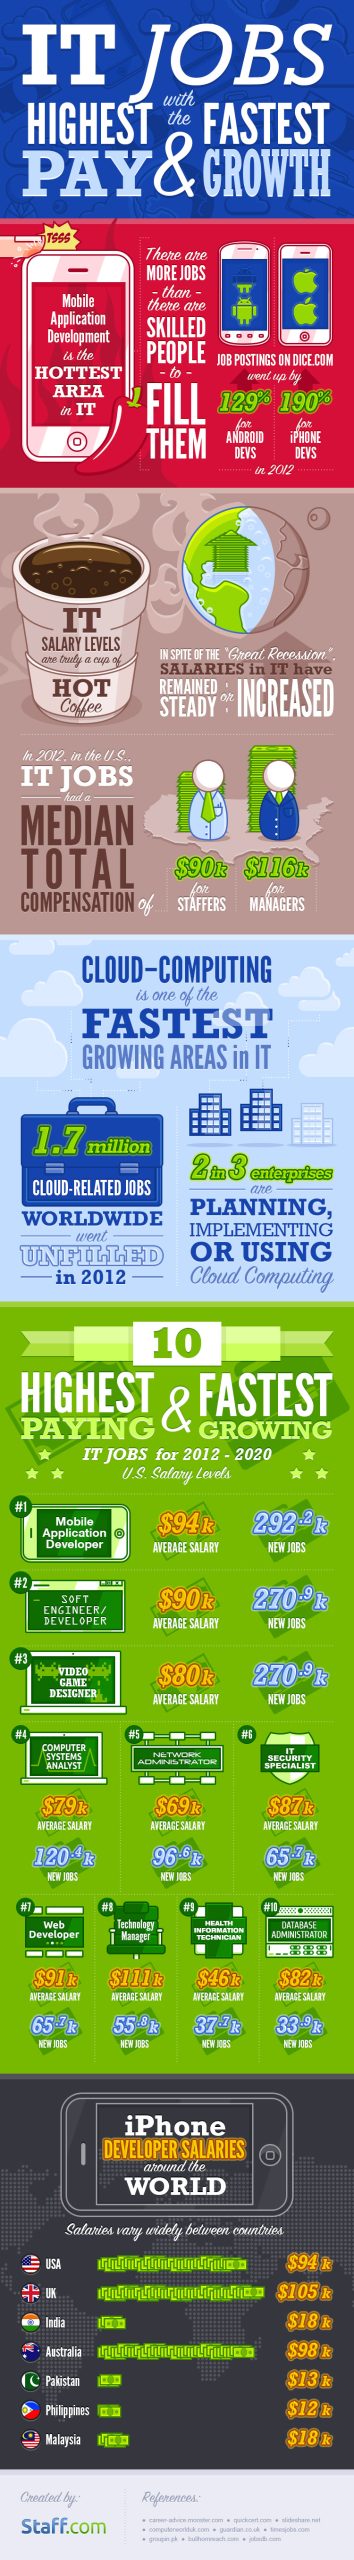 Staff.com - IT Jobs with the Highest Pay and Fastest Growth Infographic